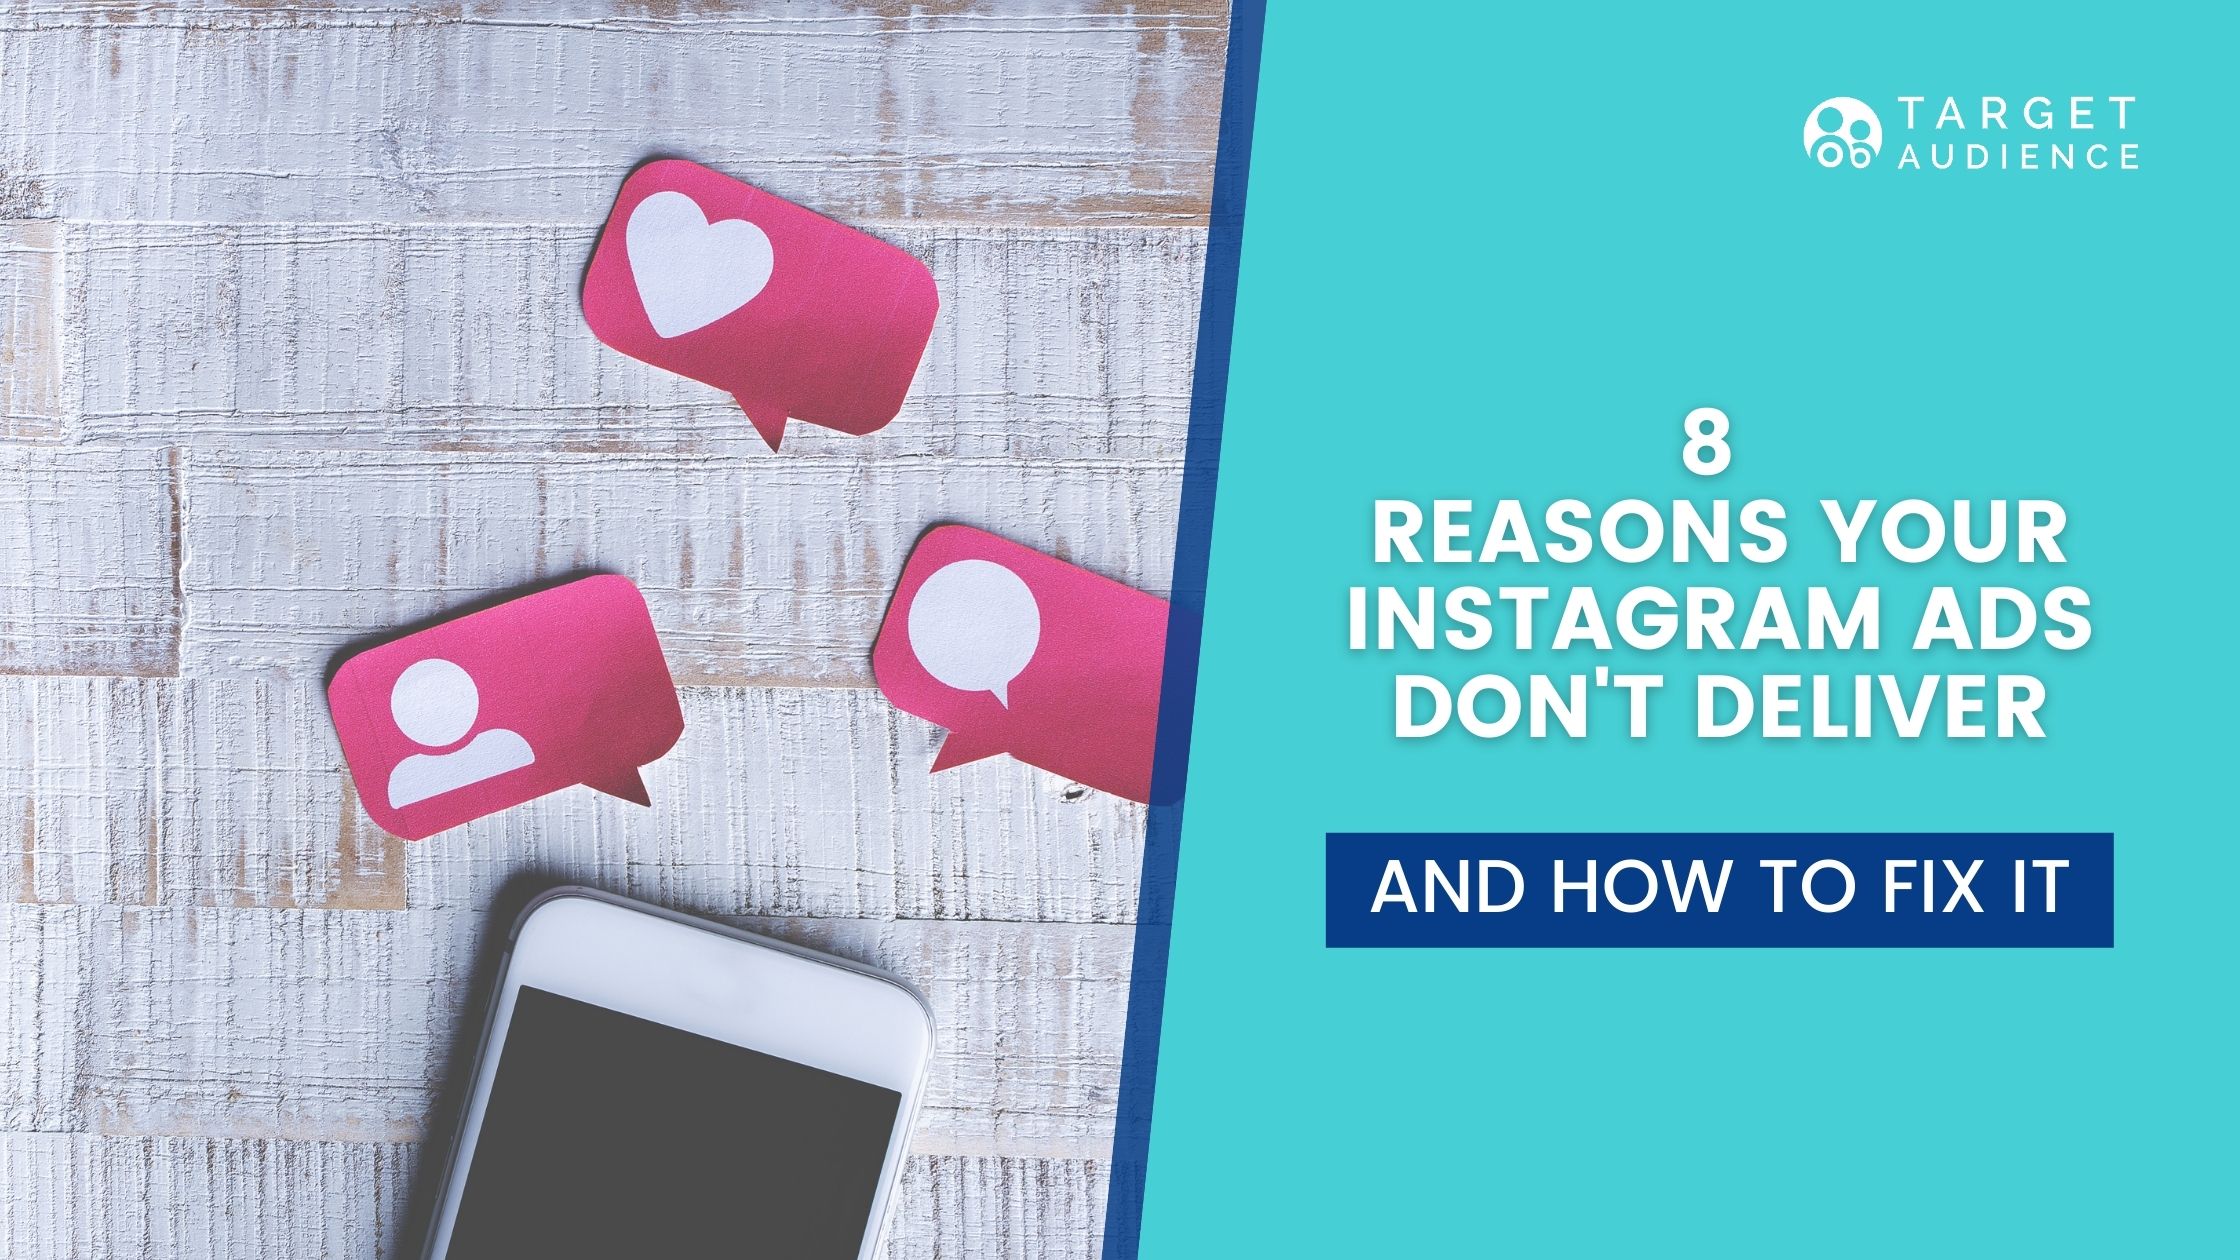 8 Reasons Your Instagram Ads Don't Deliver - Target Audience